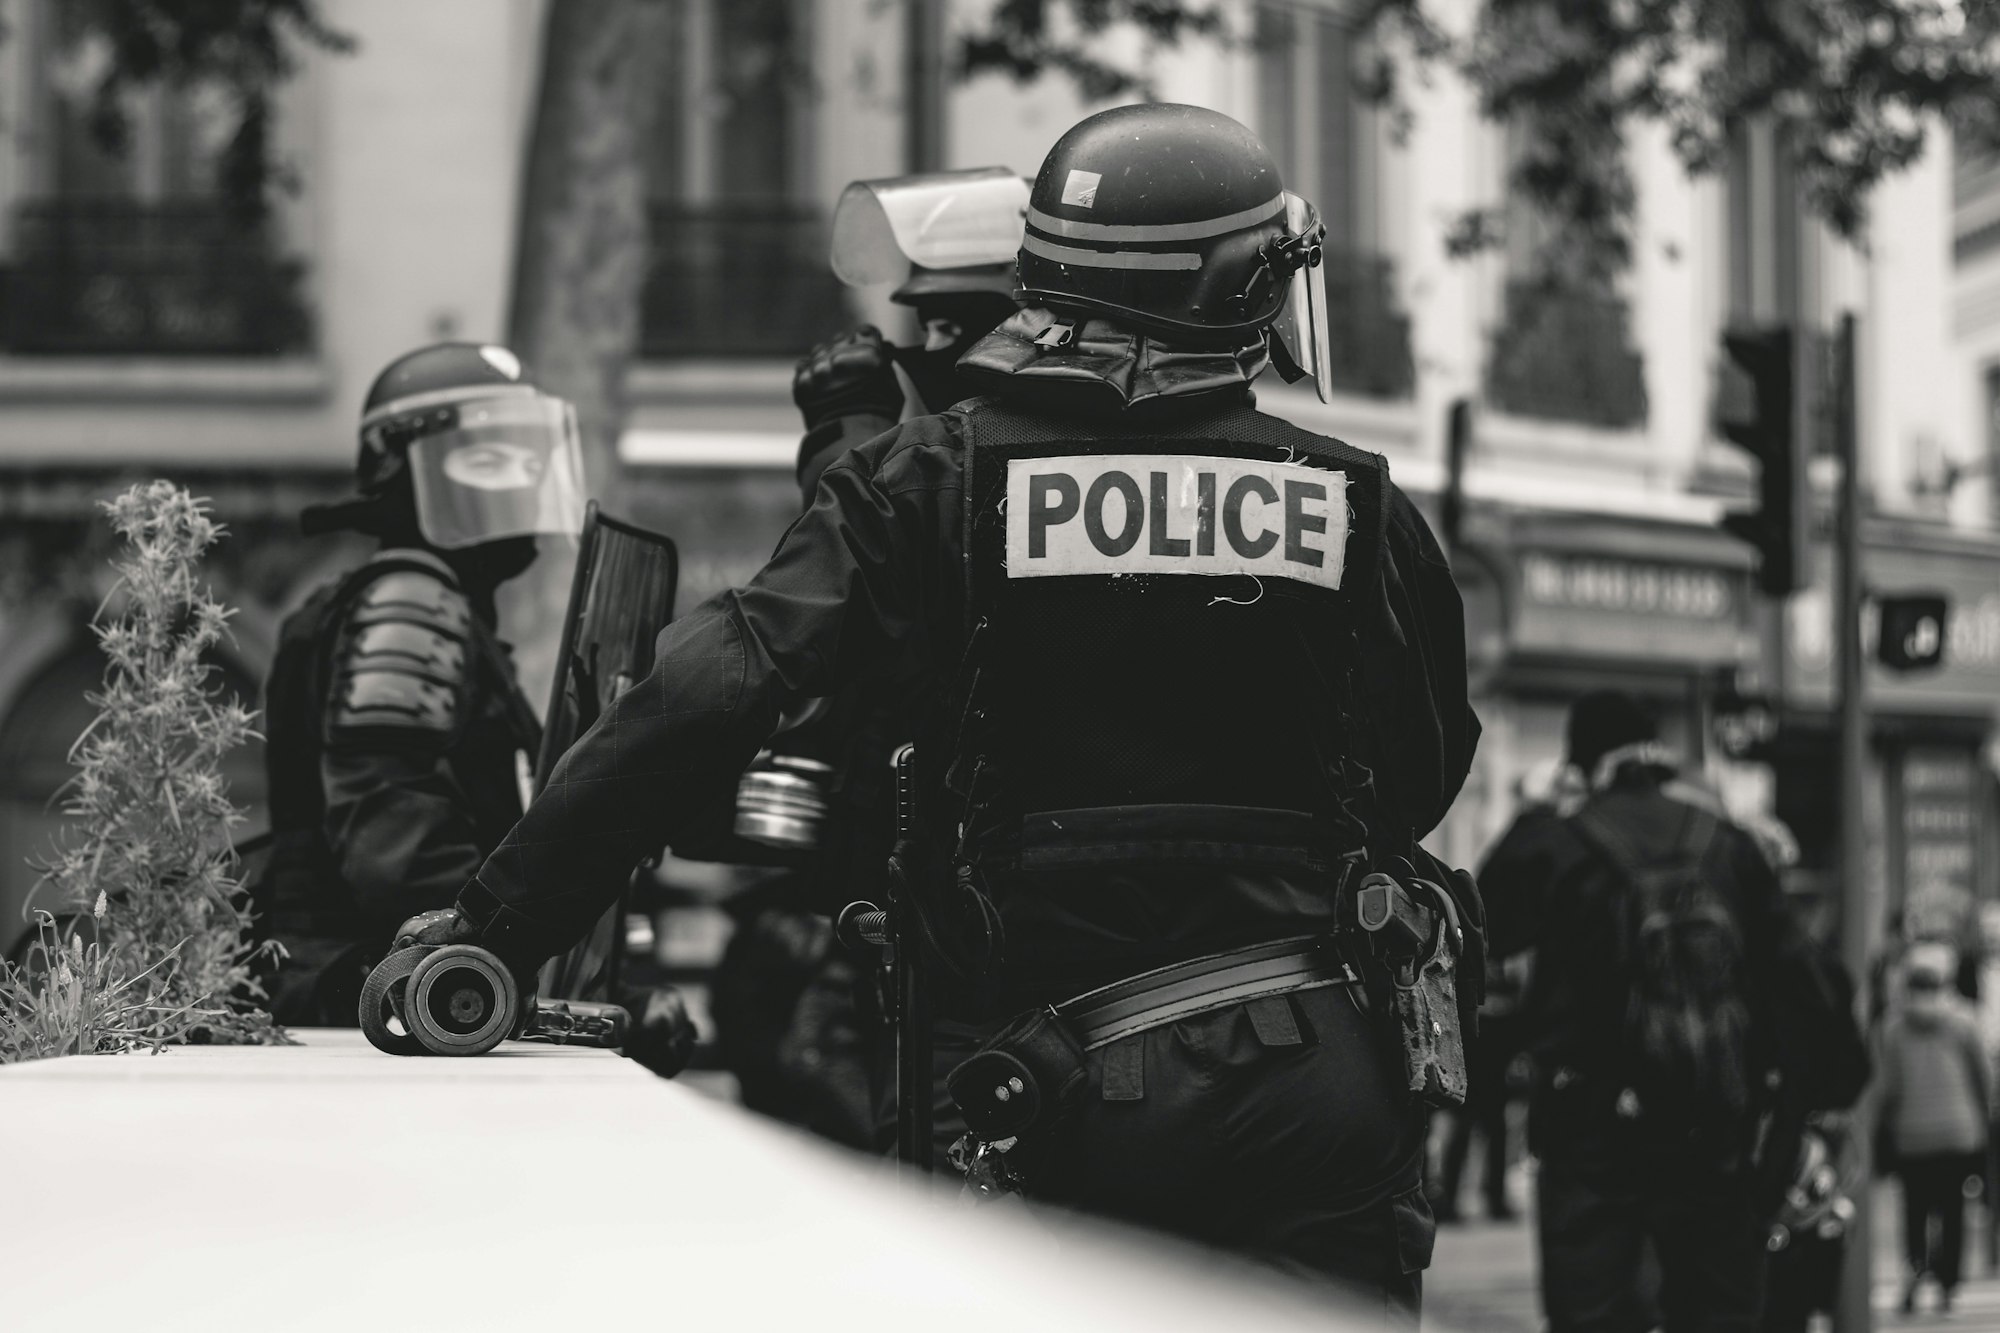 High police presence in Lyon, France, during the 25th weekend of the yellow vests movement.

Police violence is at its highest since the 1950s. There is an extensive use of tear gas, sting-ball grenades and the LBDs ("defense ball launchers") against largely peaceful protesters. The policeman holds his hand on a LBD, shown on the left in the picture. The use of LBDs is very controversial, causing serious injuries.

As of now (May 5th), 292 persons claim to be seriously injured by rubber balls, 23 persons lost an eye, 5 a hand during protests (source: mediapart.fr, http://tiny.cc/6hd85y).